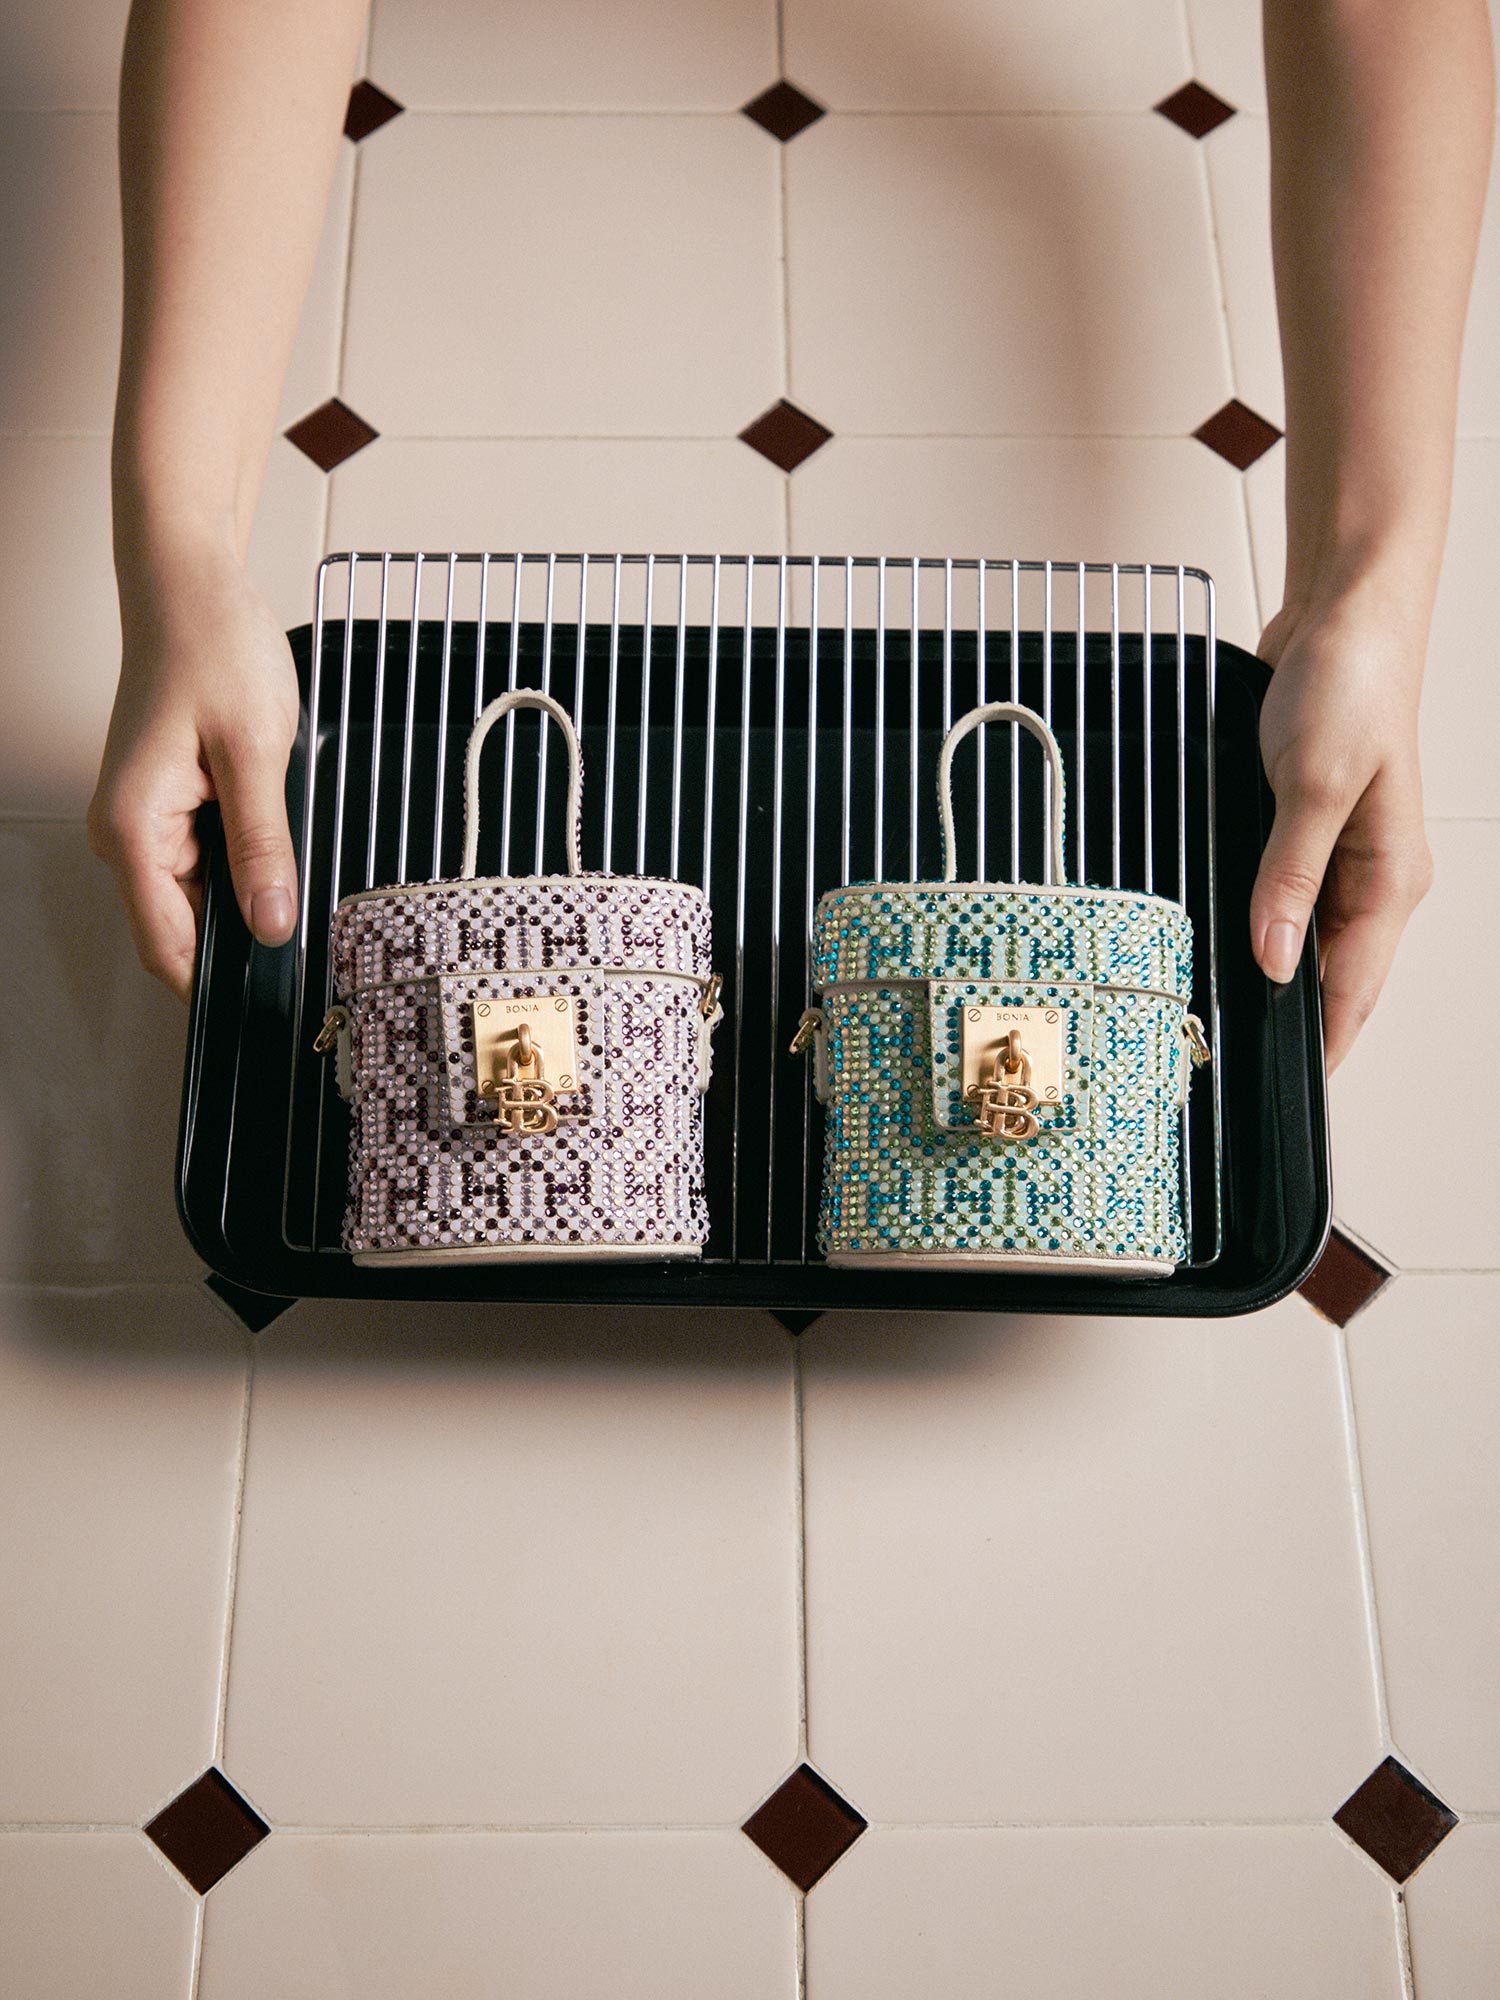 Bonia releases pastry-inspired carriers for Hari Raya